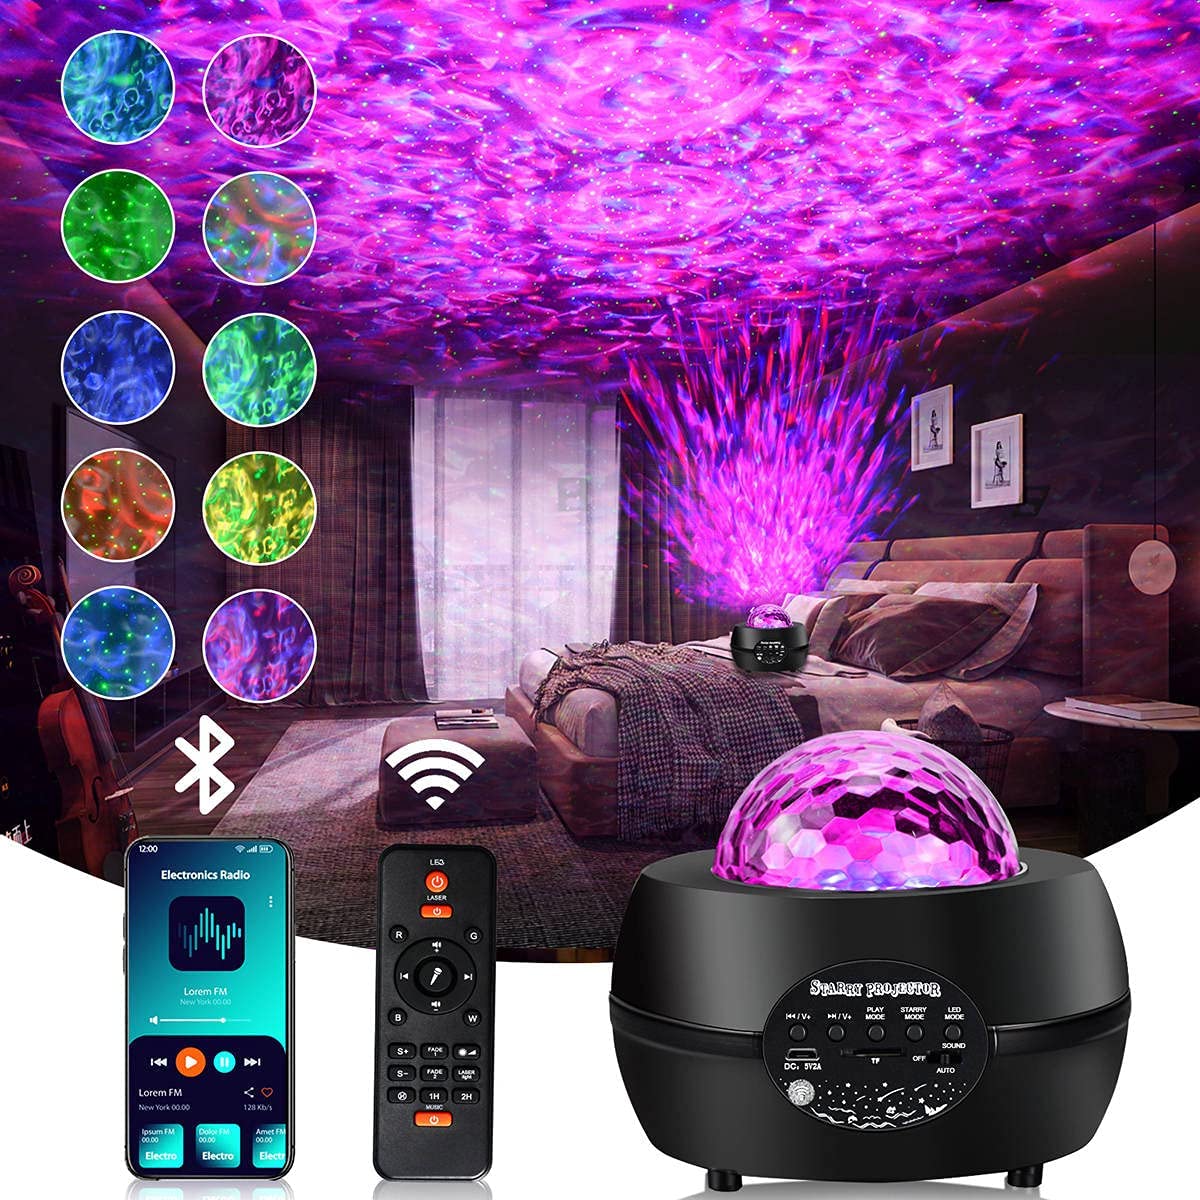 Romwish Remote Control Star Projector Night Light with Bluetooth Speaker - $12.99 + Free Shipping